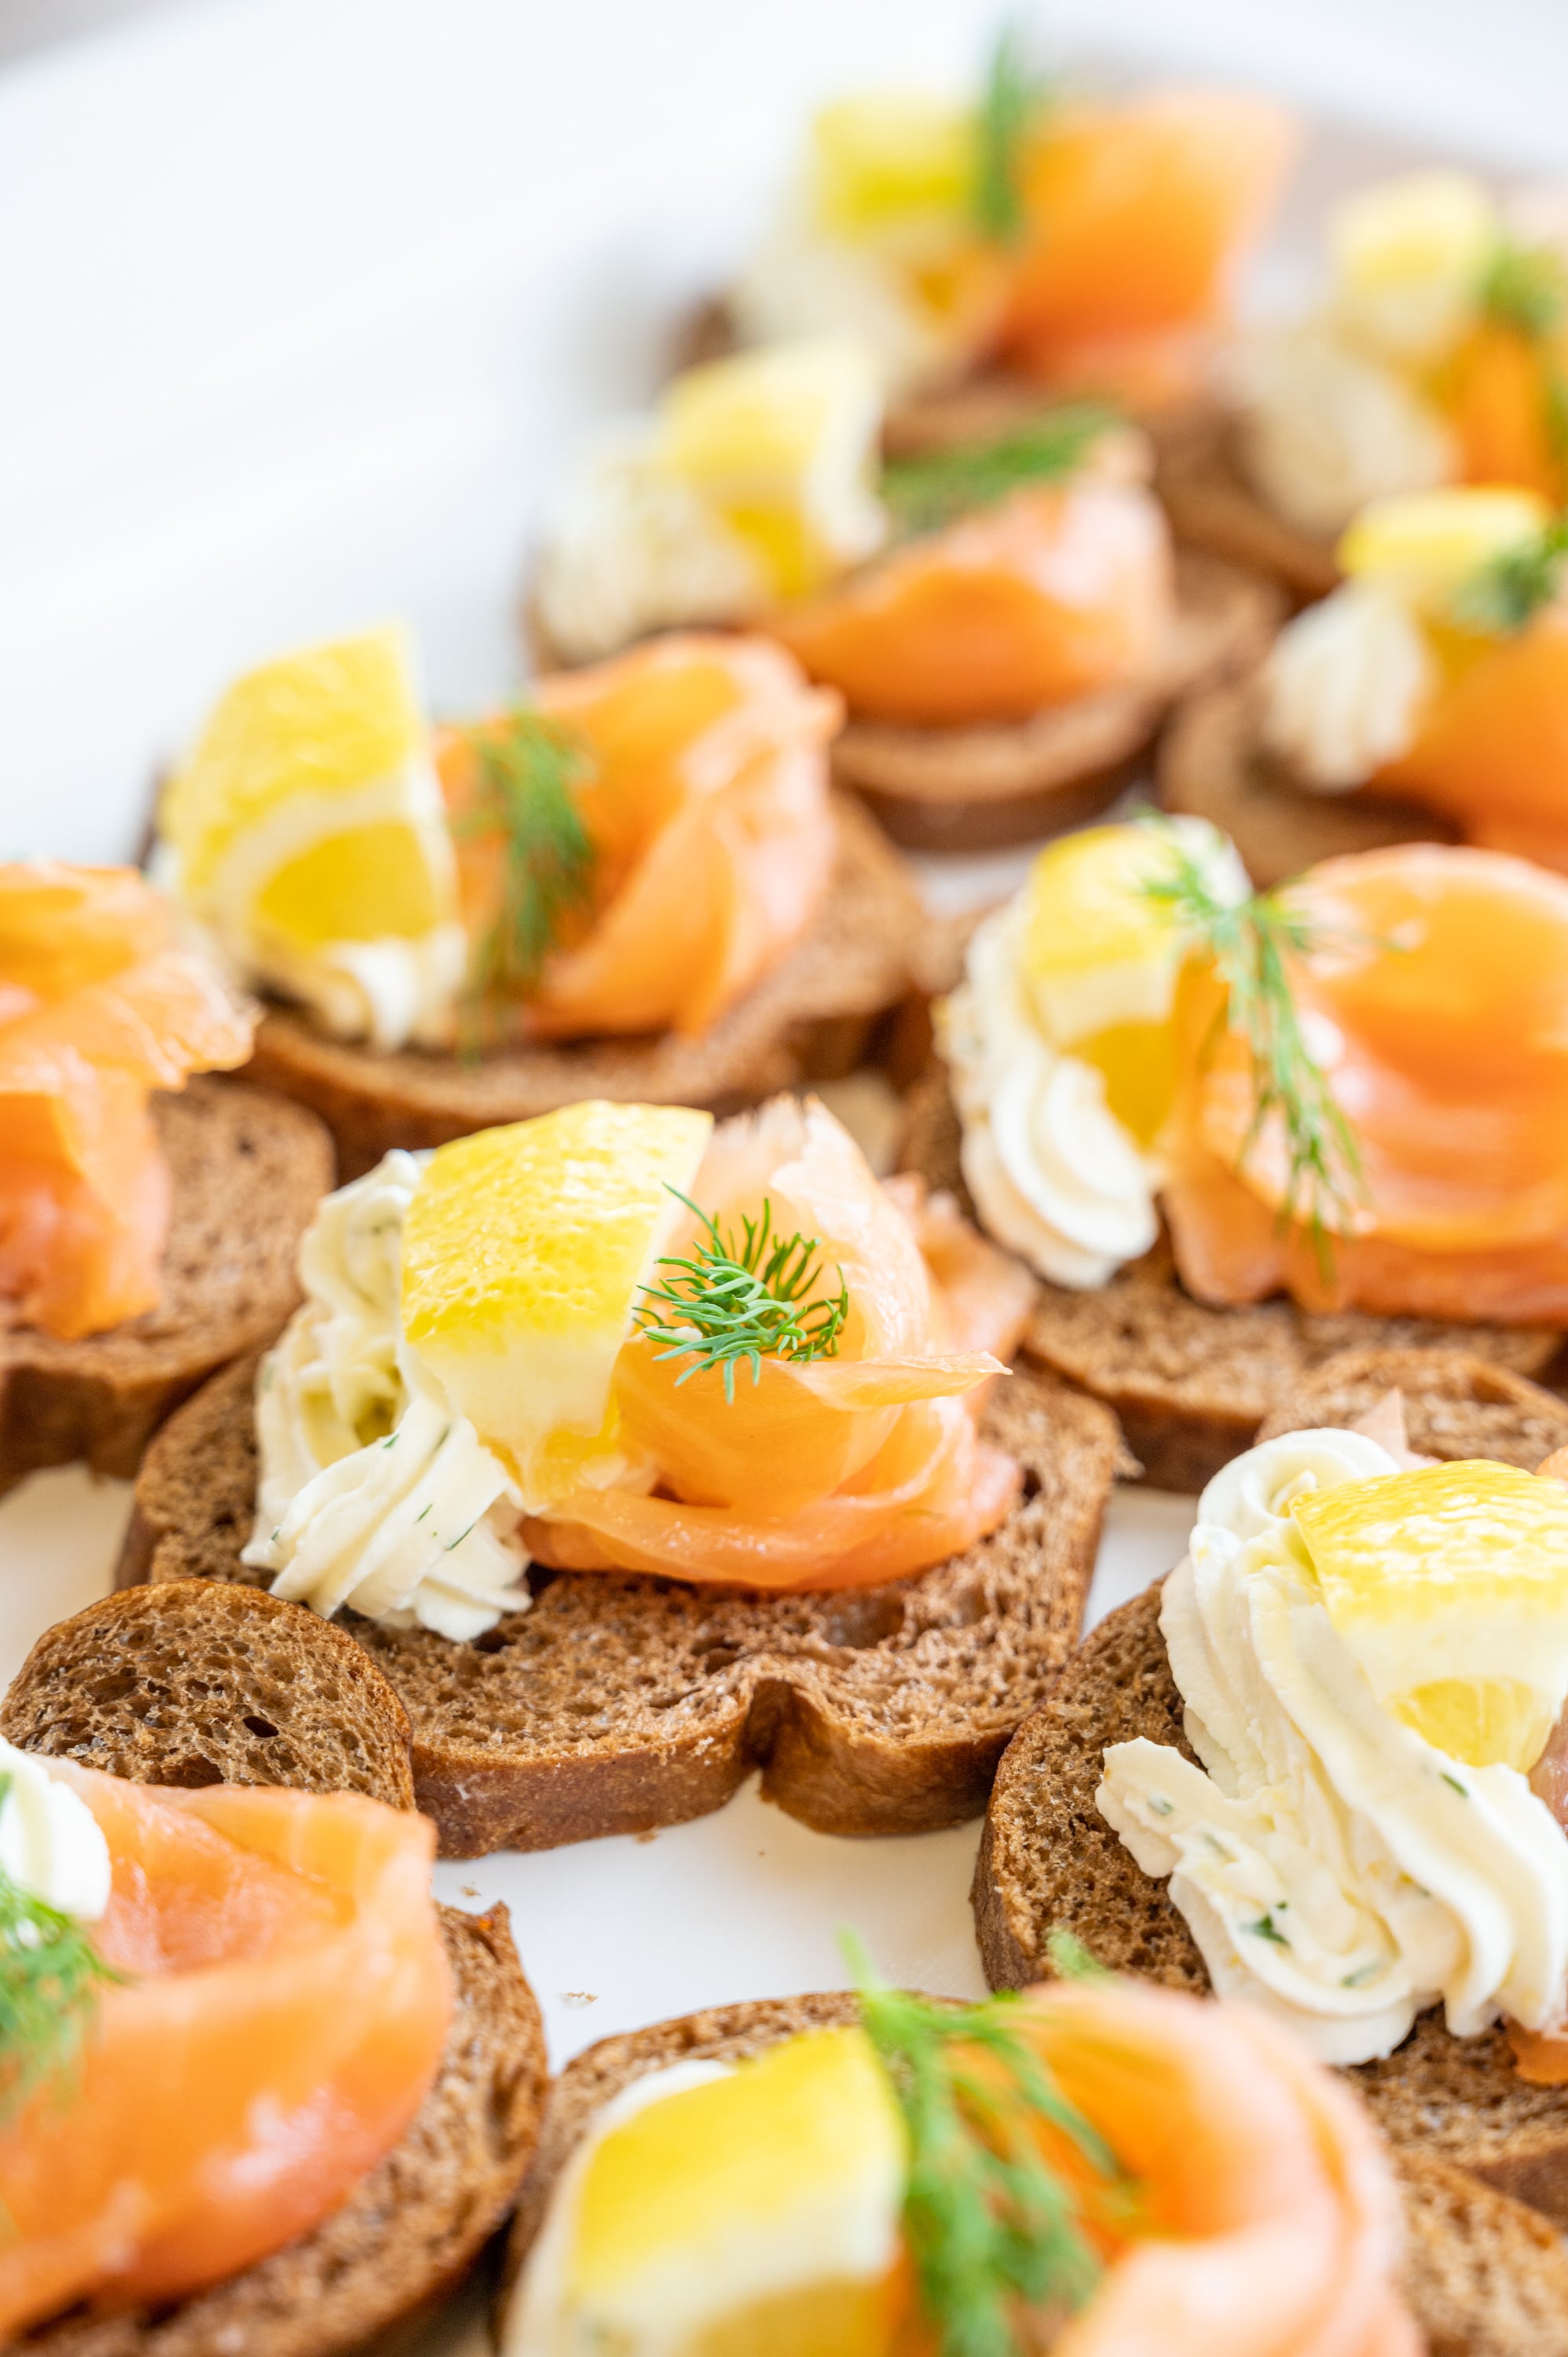 Plate of salmon on brown bread